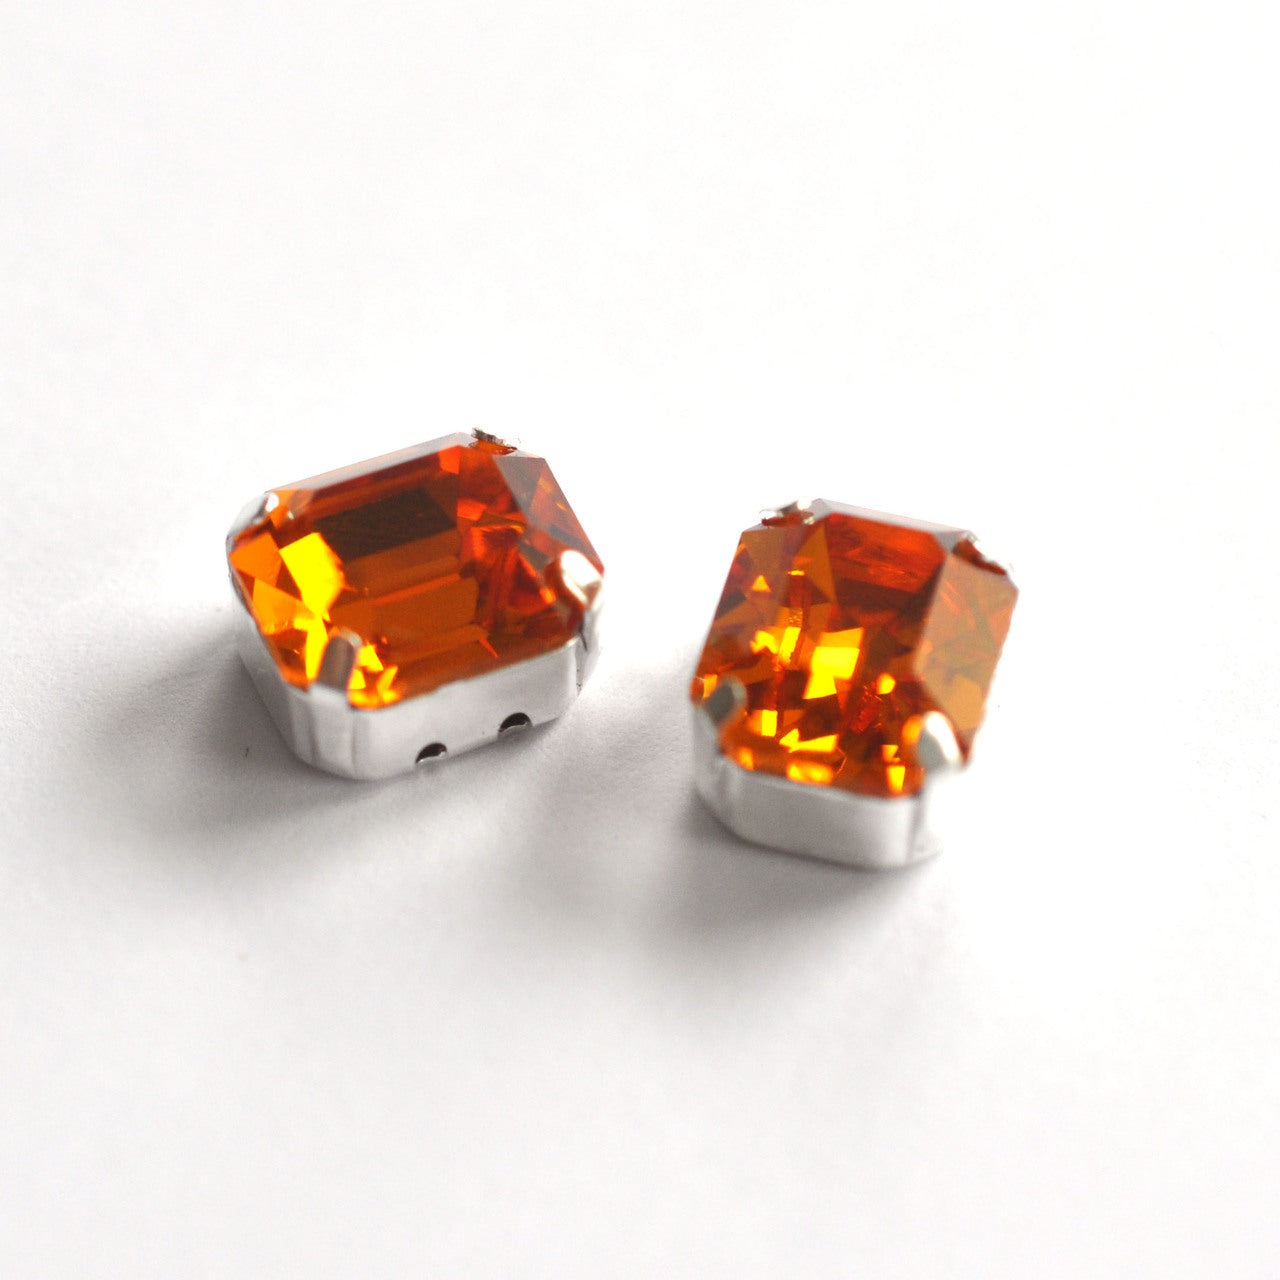 Topaz 12x10mm Octagon Sew On Crystals - 2 Pieces